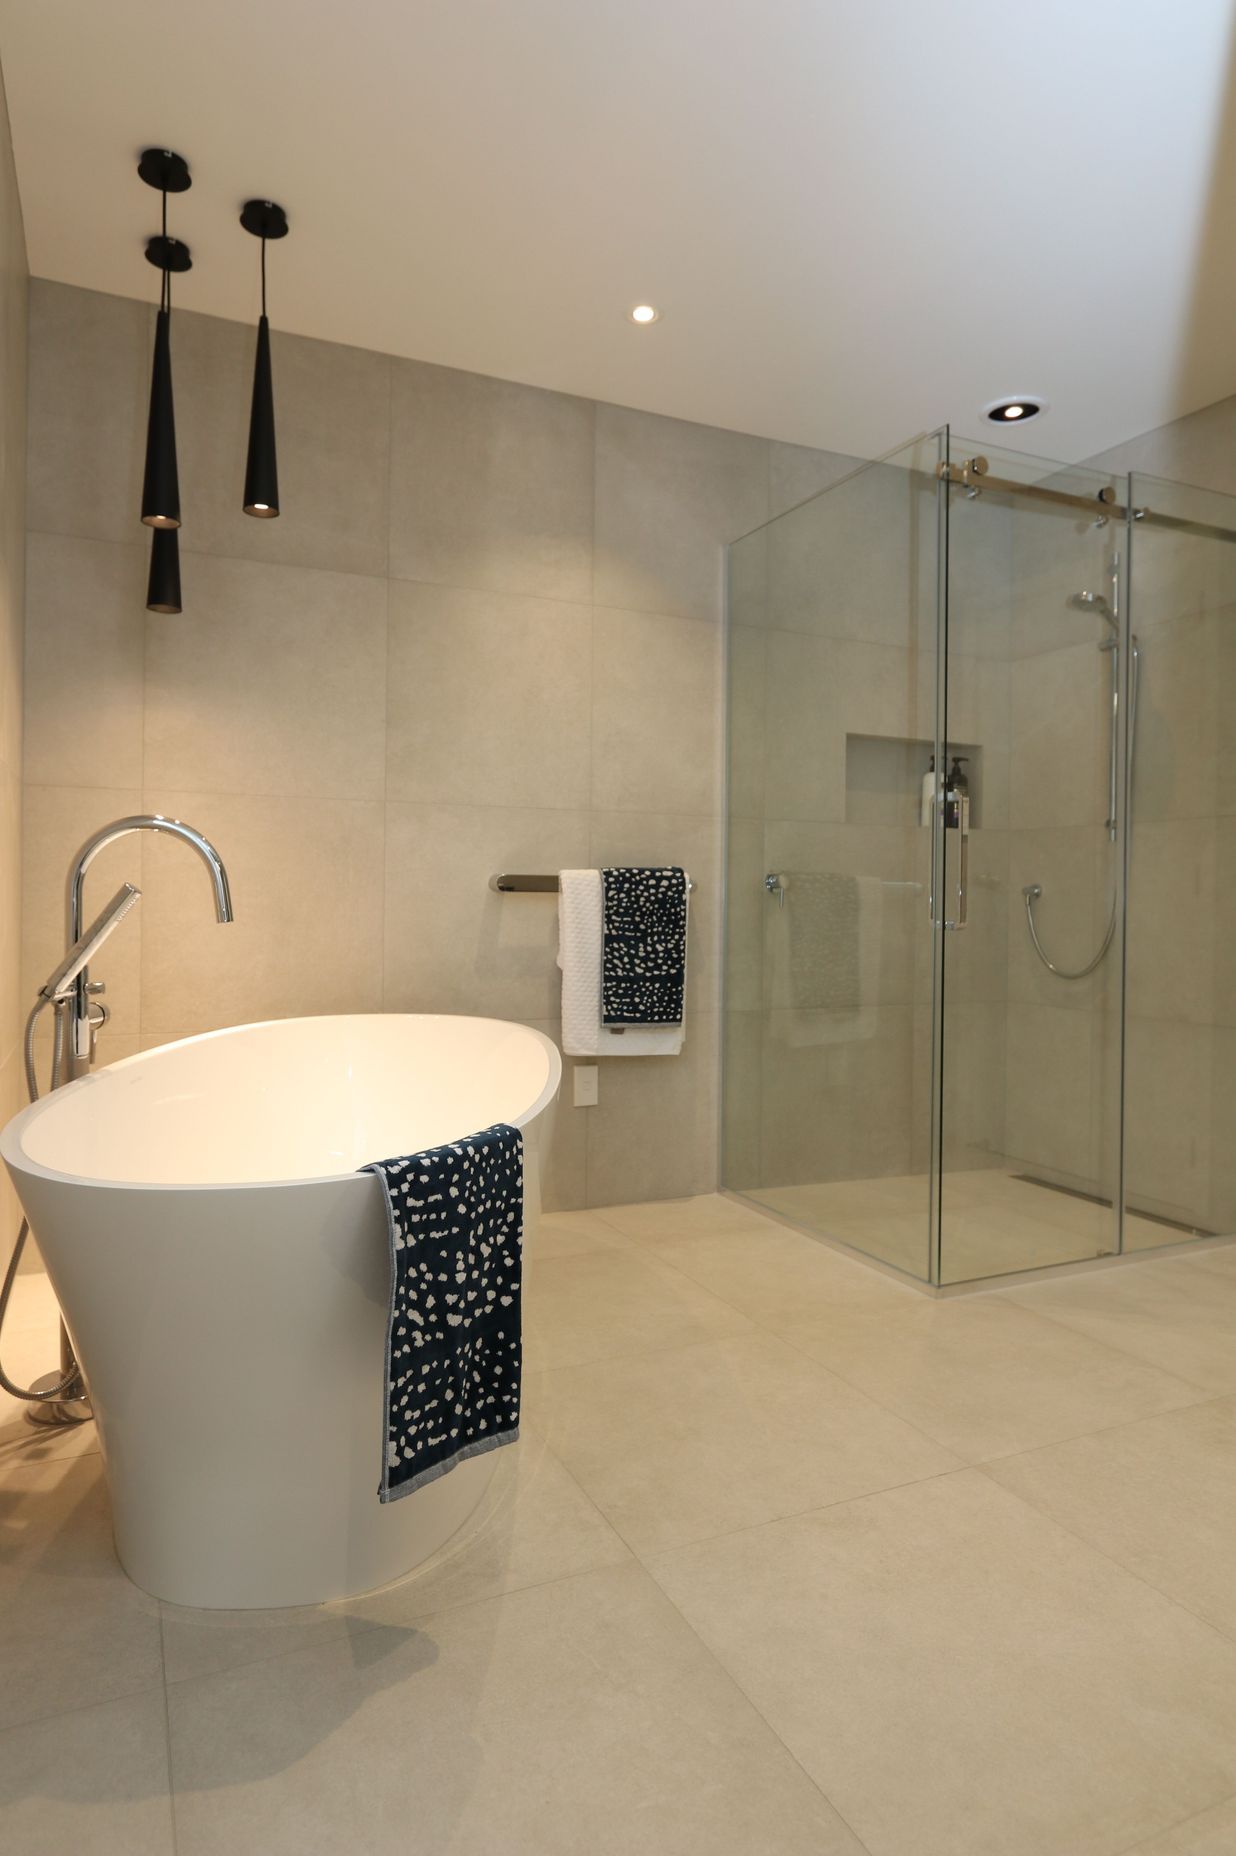 The main bathroom exerts just as much wow-factor as the ensuite with its large frameless glass shower and luxurious bath set-up.